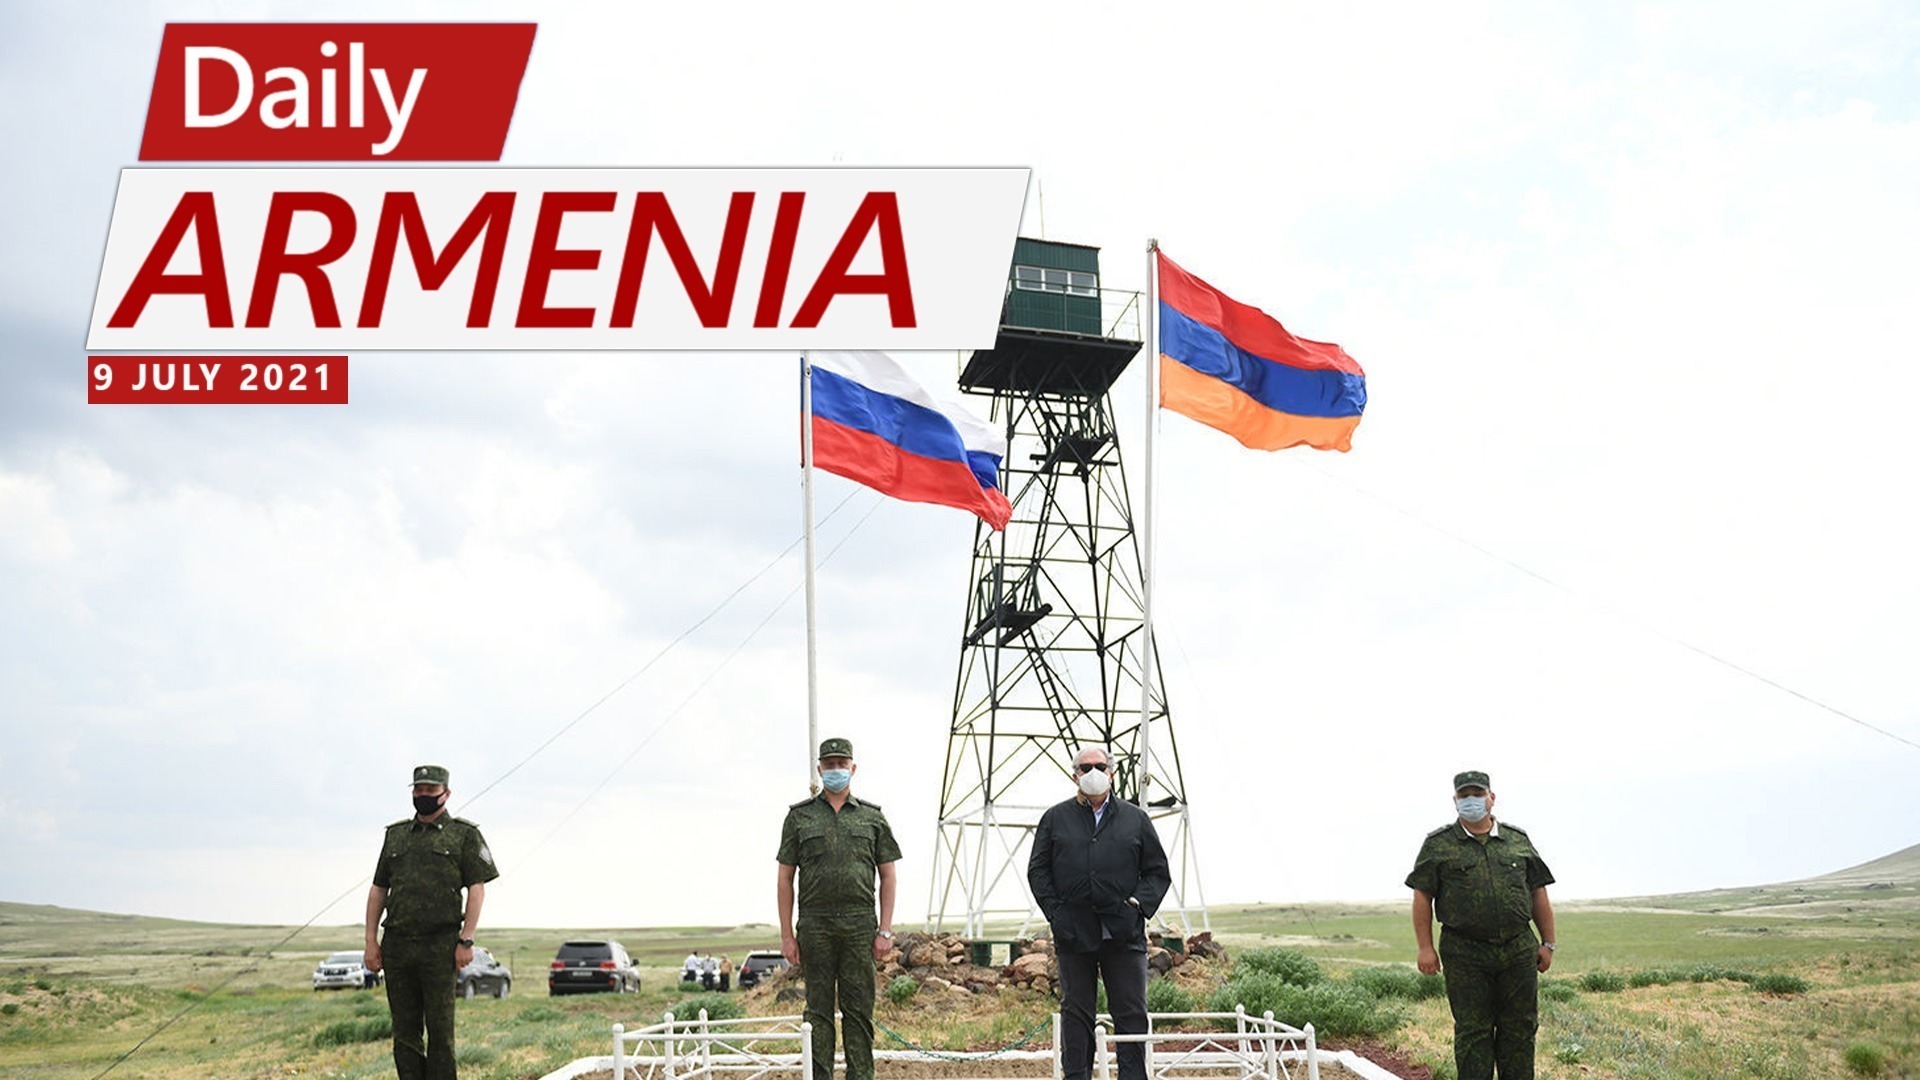 Russia says it’s ready to assist Armenia and Azerbaijan with border demarcation